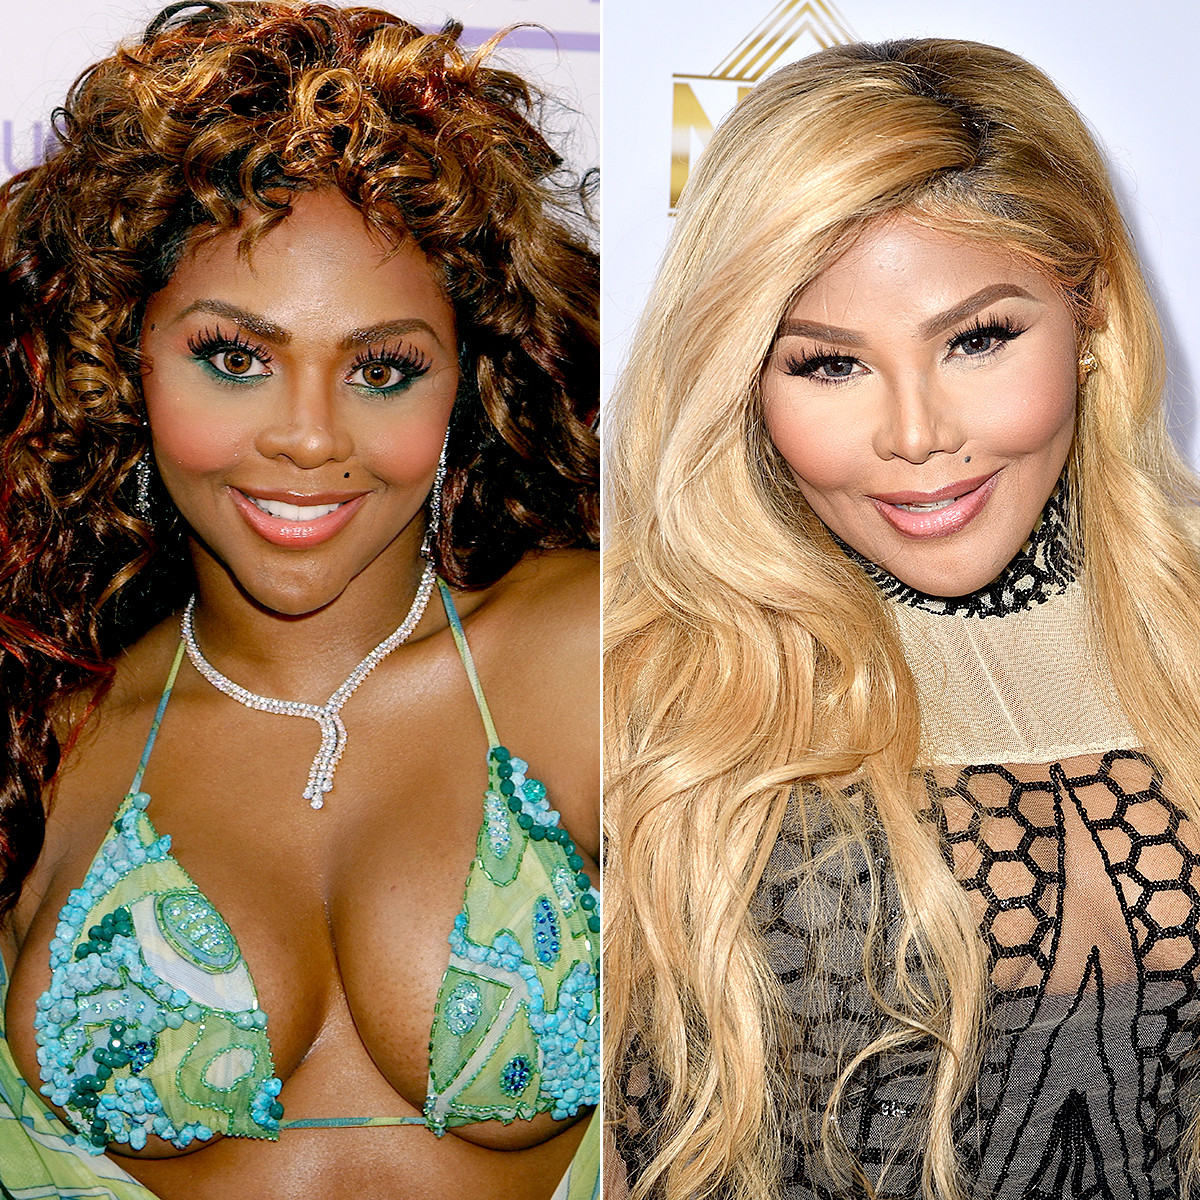 Where's Lil' Kim now? Bio Net Worth, Daughter, Now, Baby, Son, Father